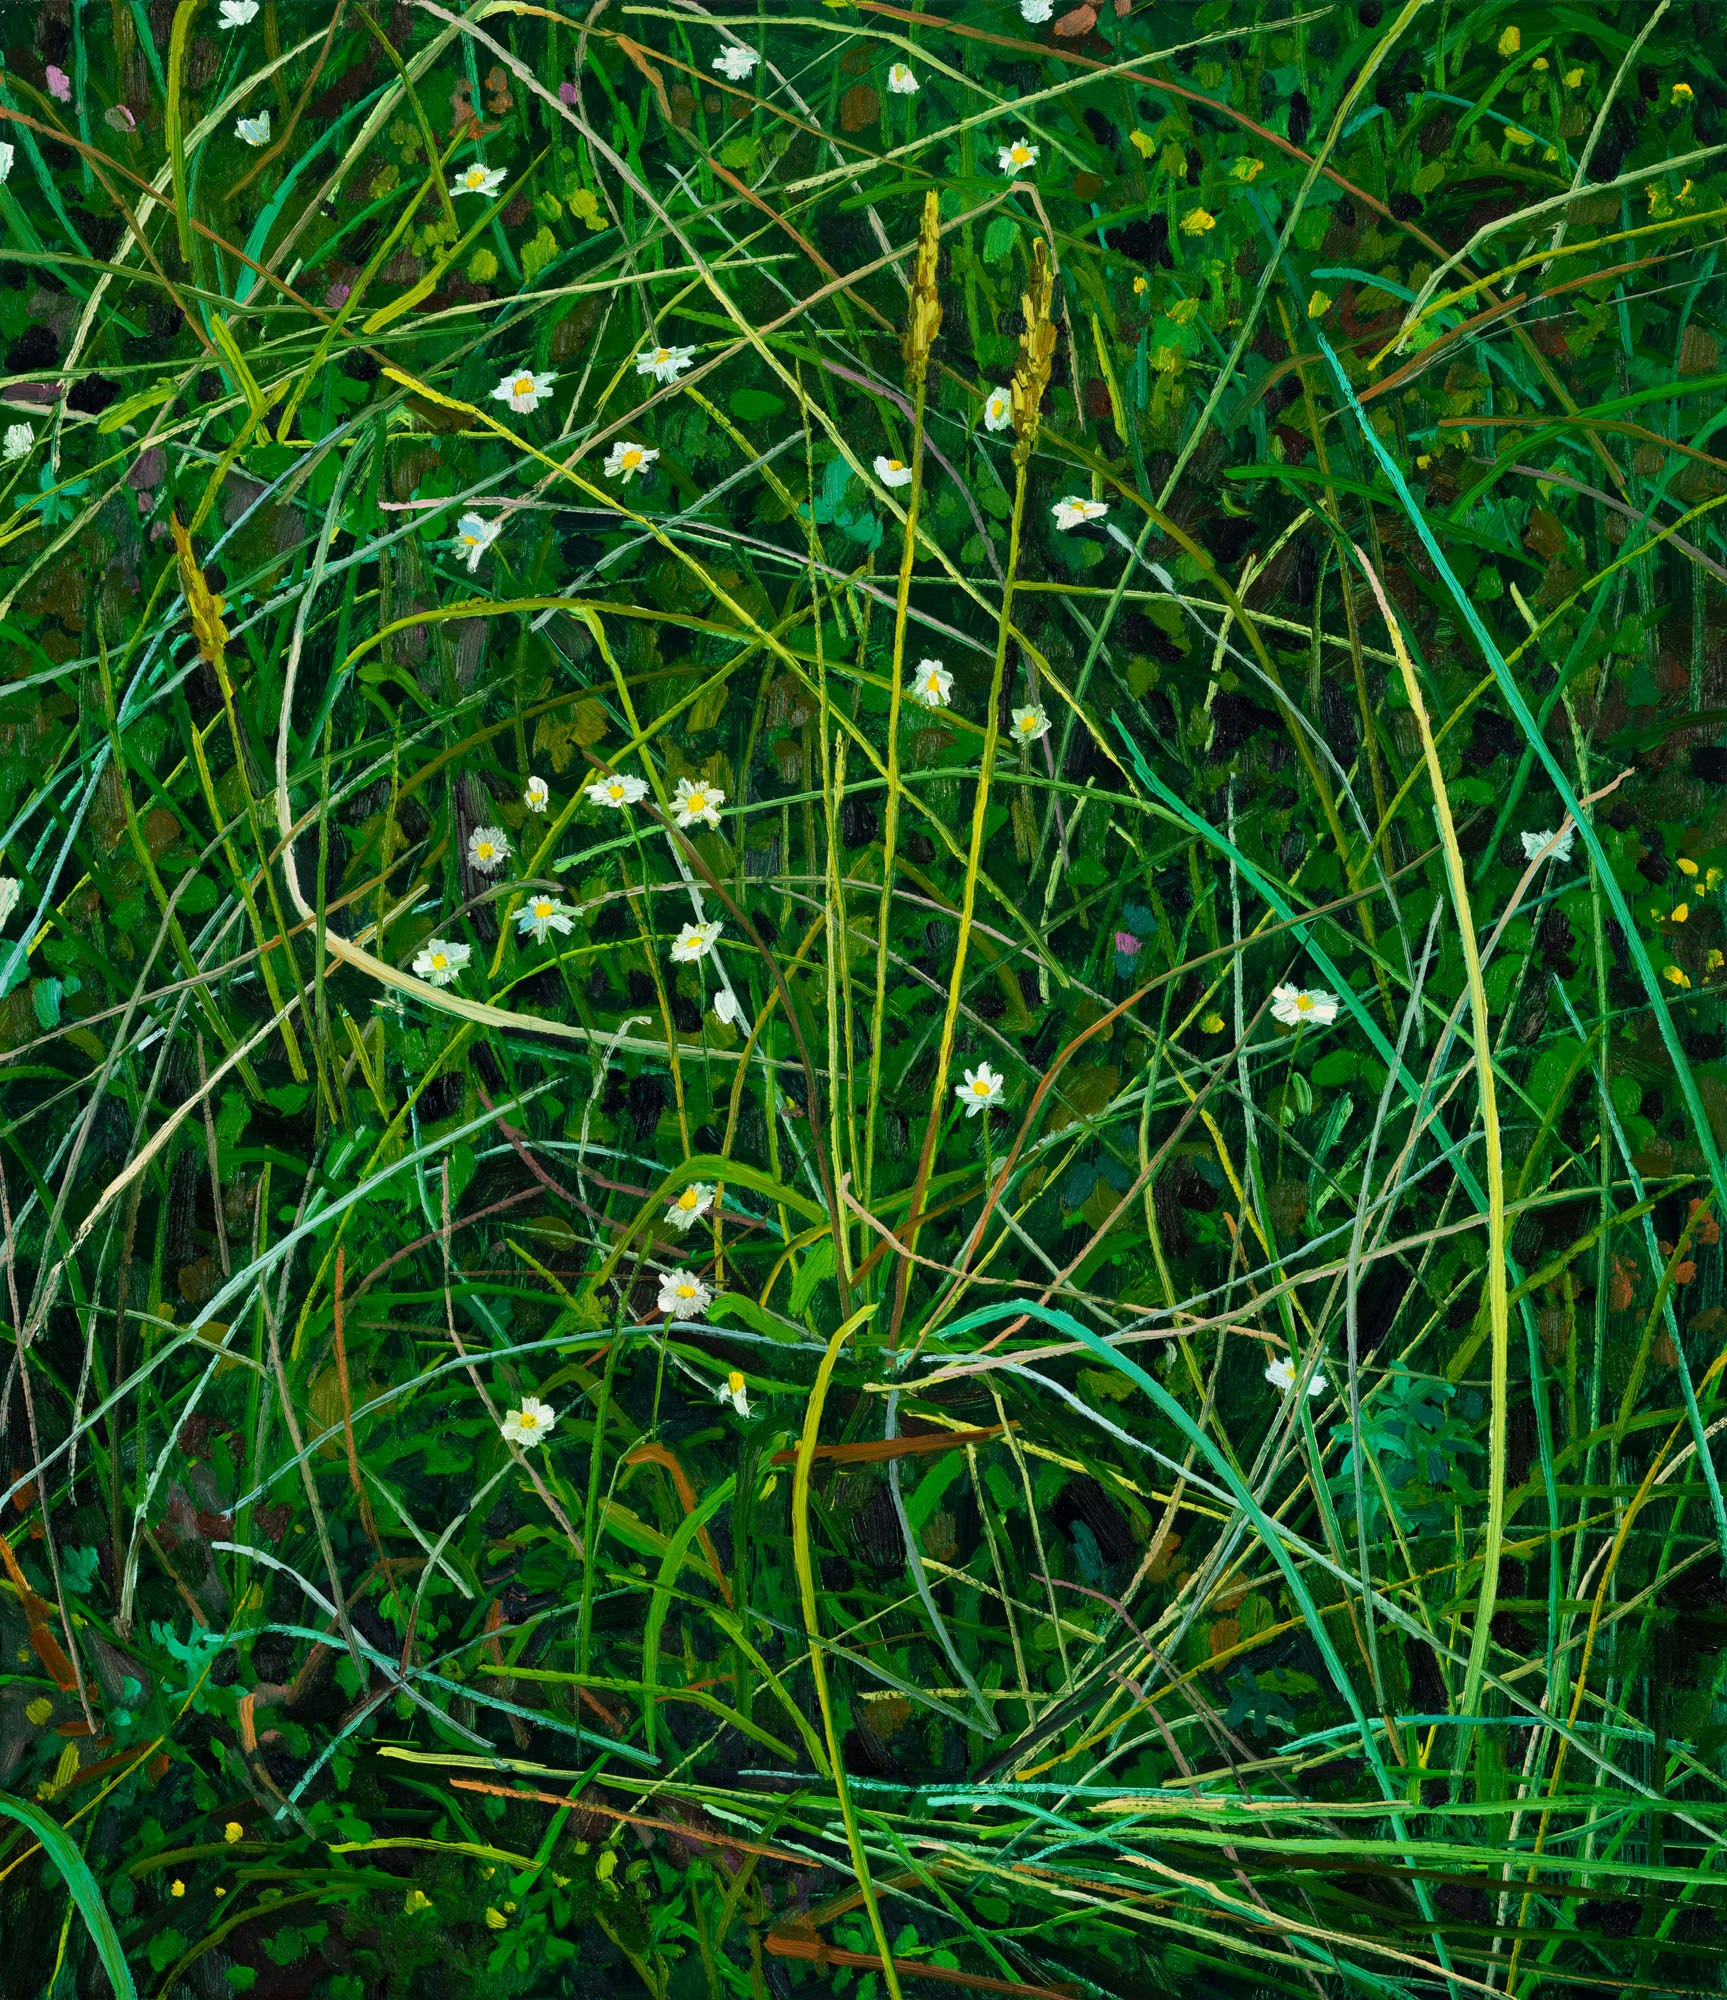 Claire Sherman, <em>Wildflowers</em>, 2020. Oil on canvas, 30 x 26 inches. Courtesy DC Moore, New York.